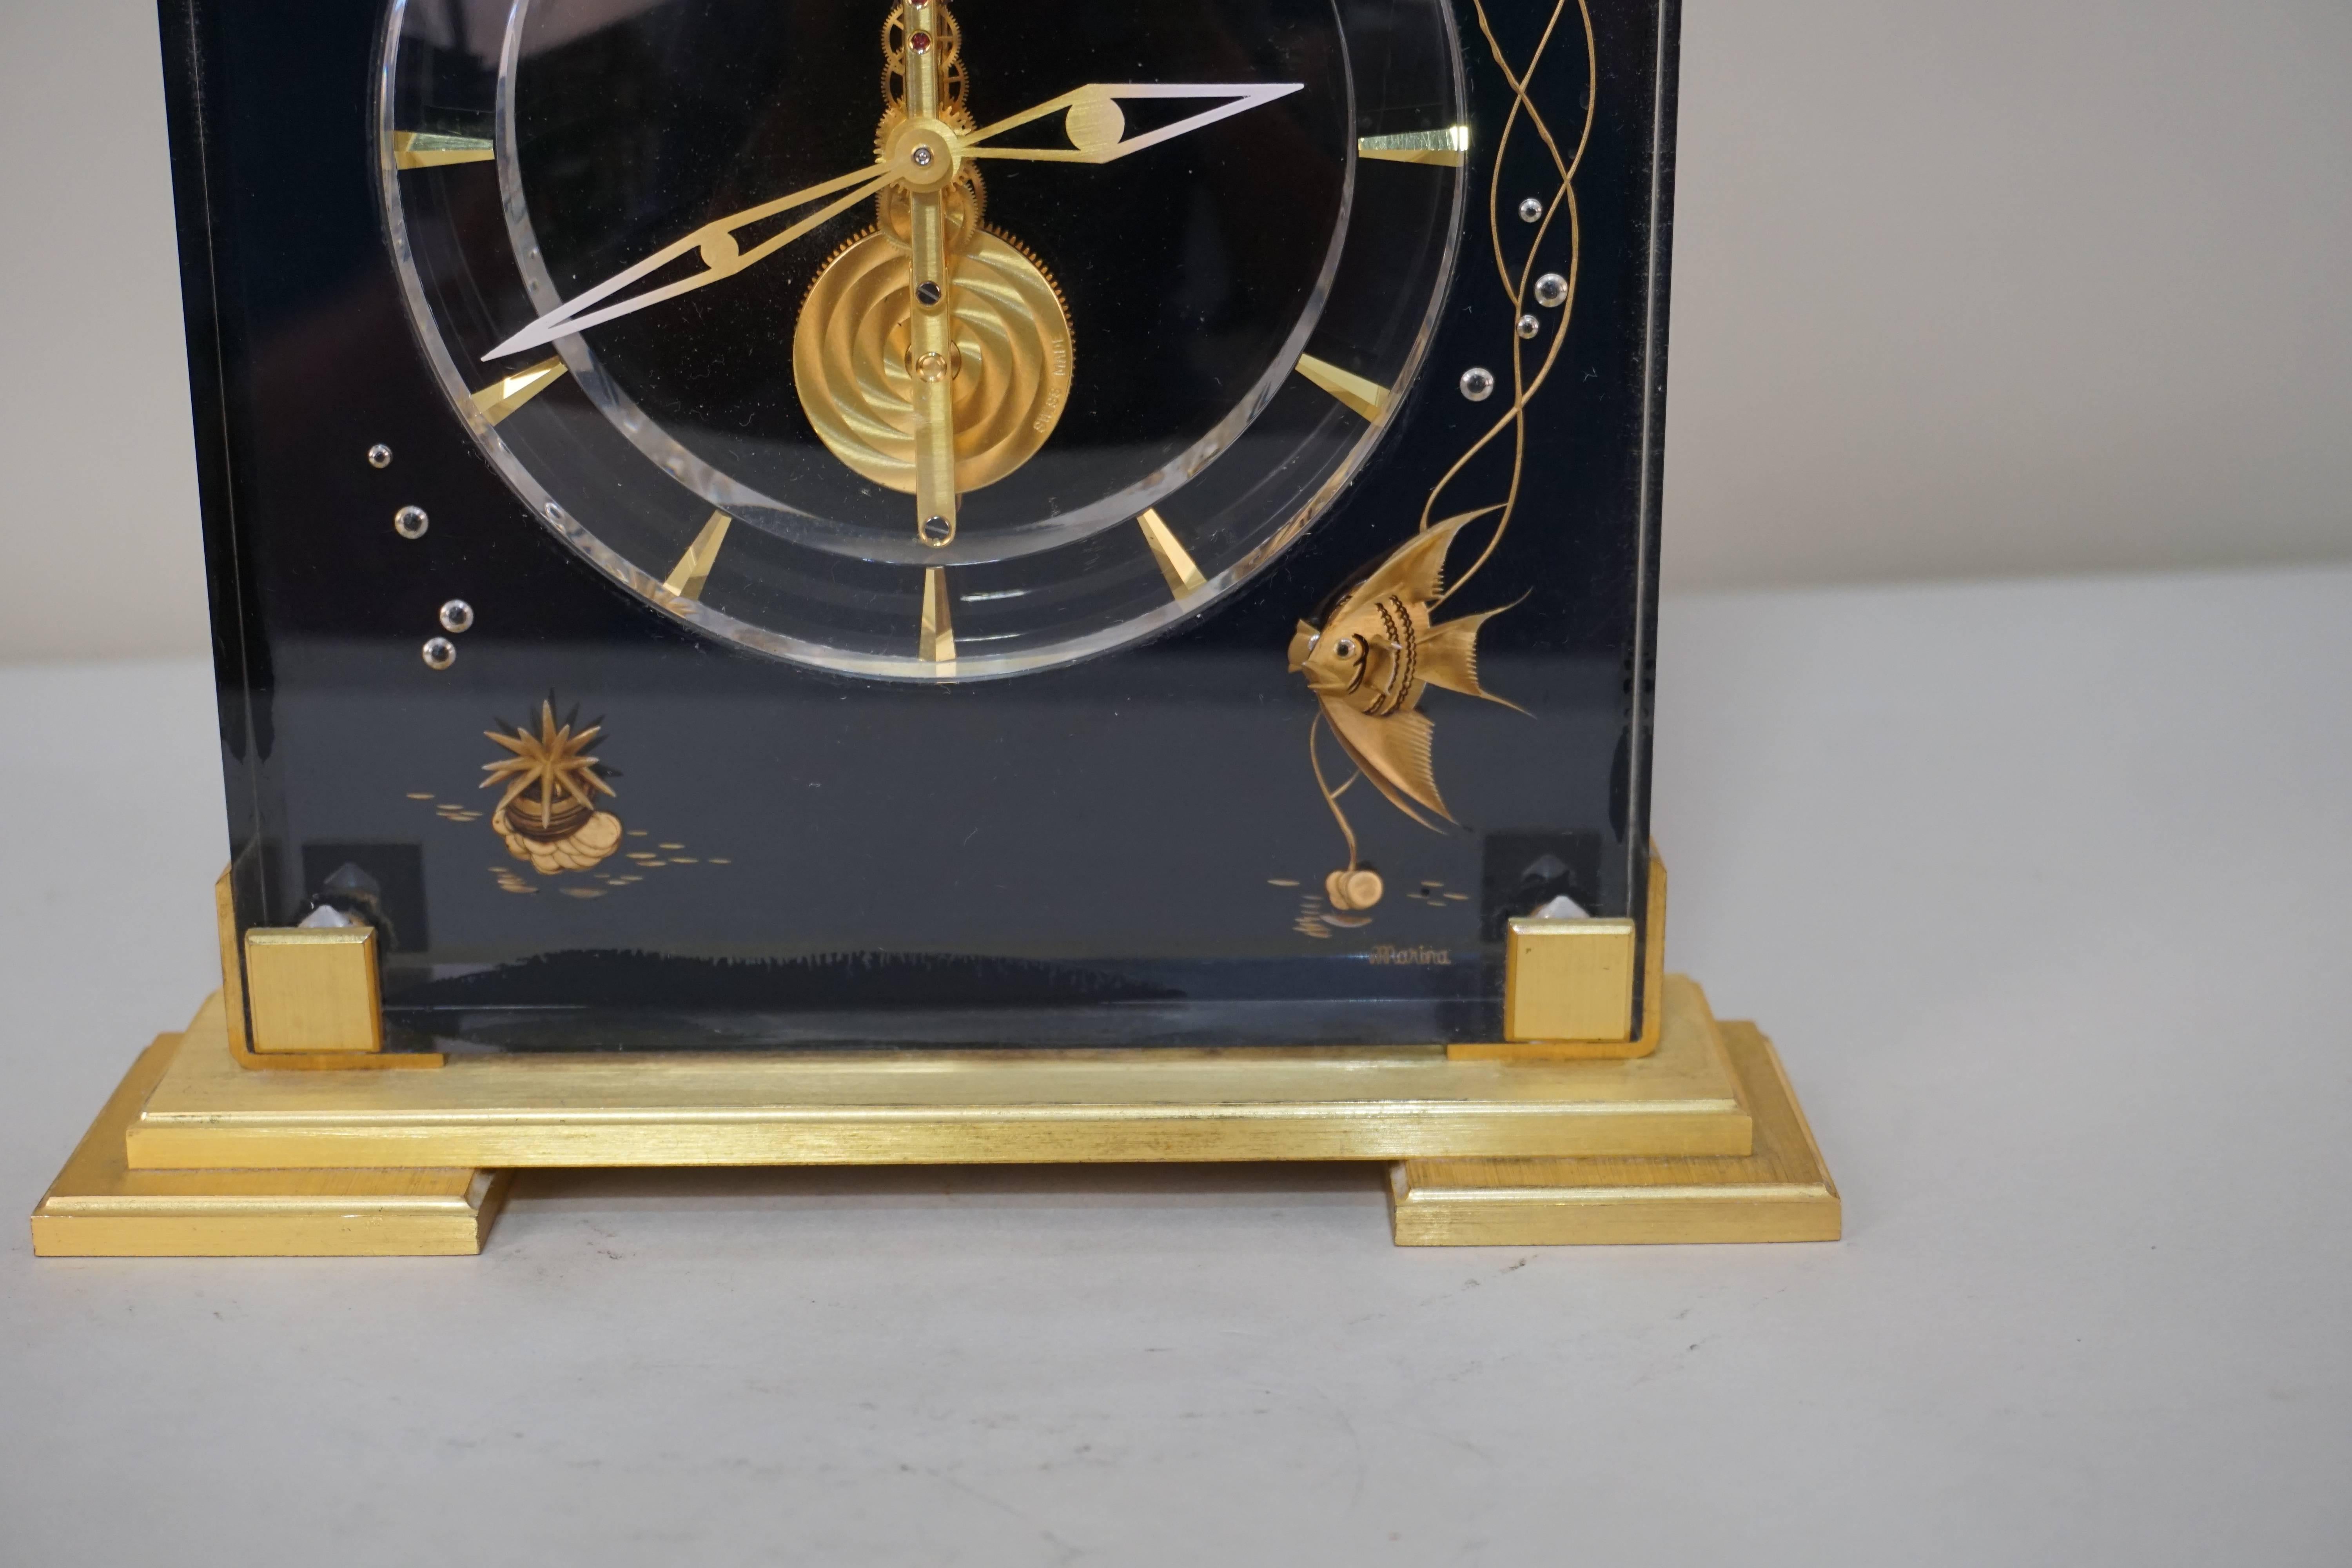 Exceptional Atmos Jaeger Le coultre aquarium in clear and black Lucite with the brushed gold plated bronze base mantel clock.